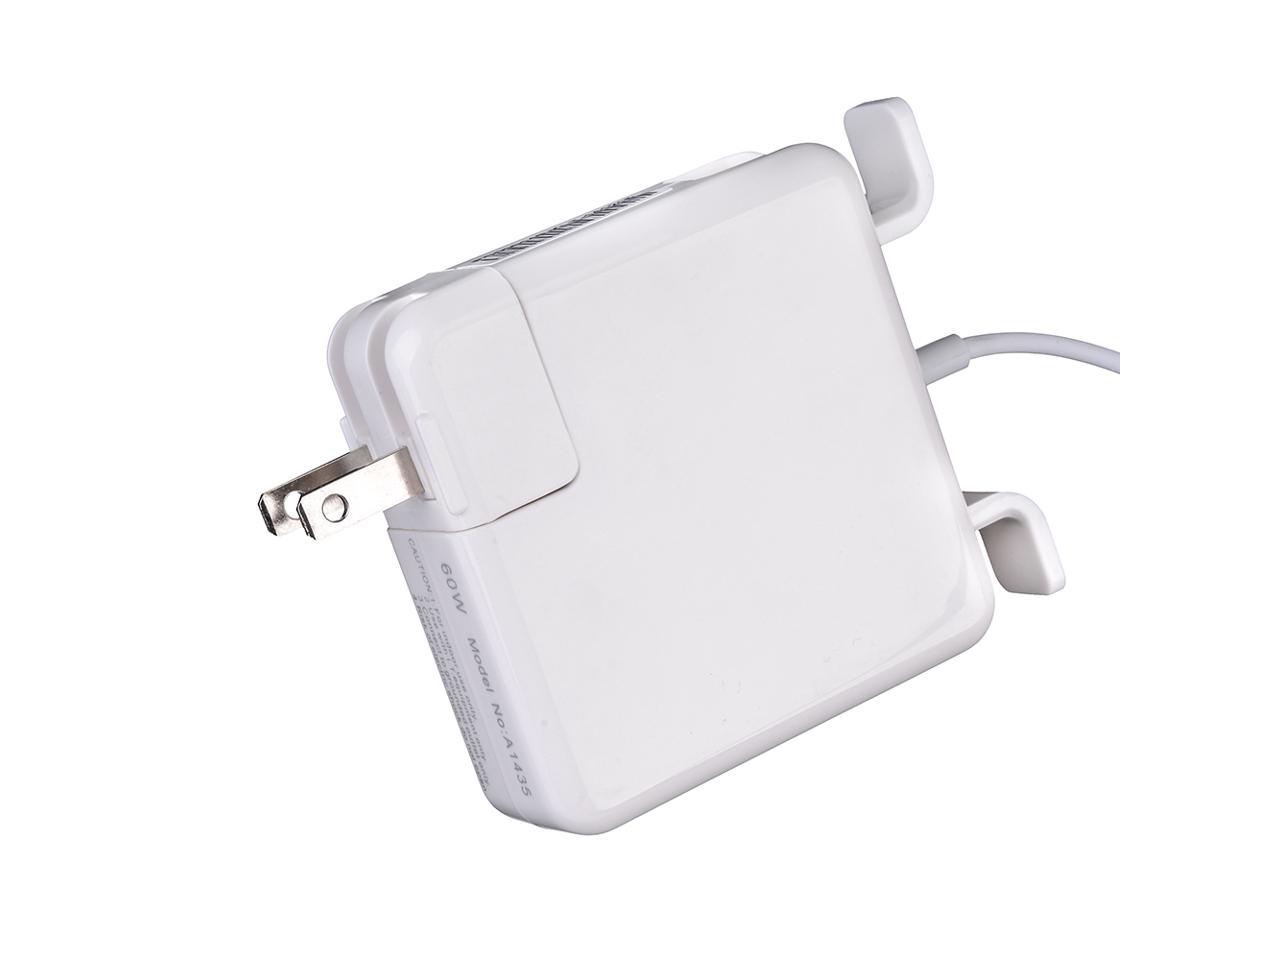 macbook air 13 inch charger 2014